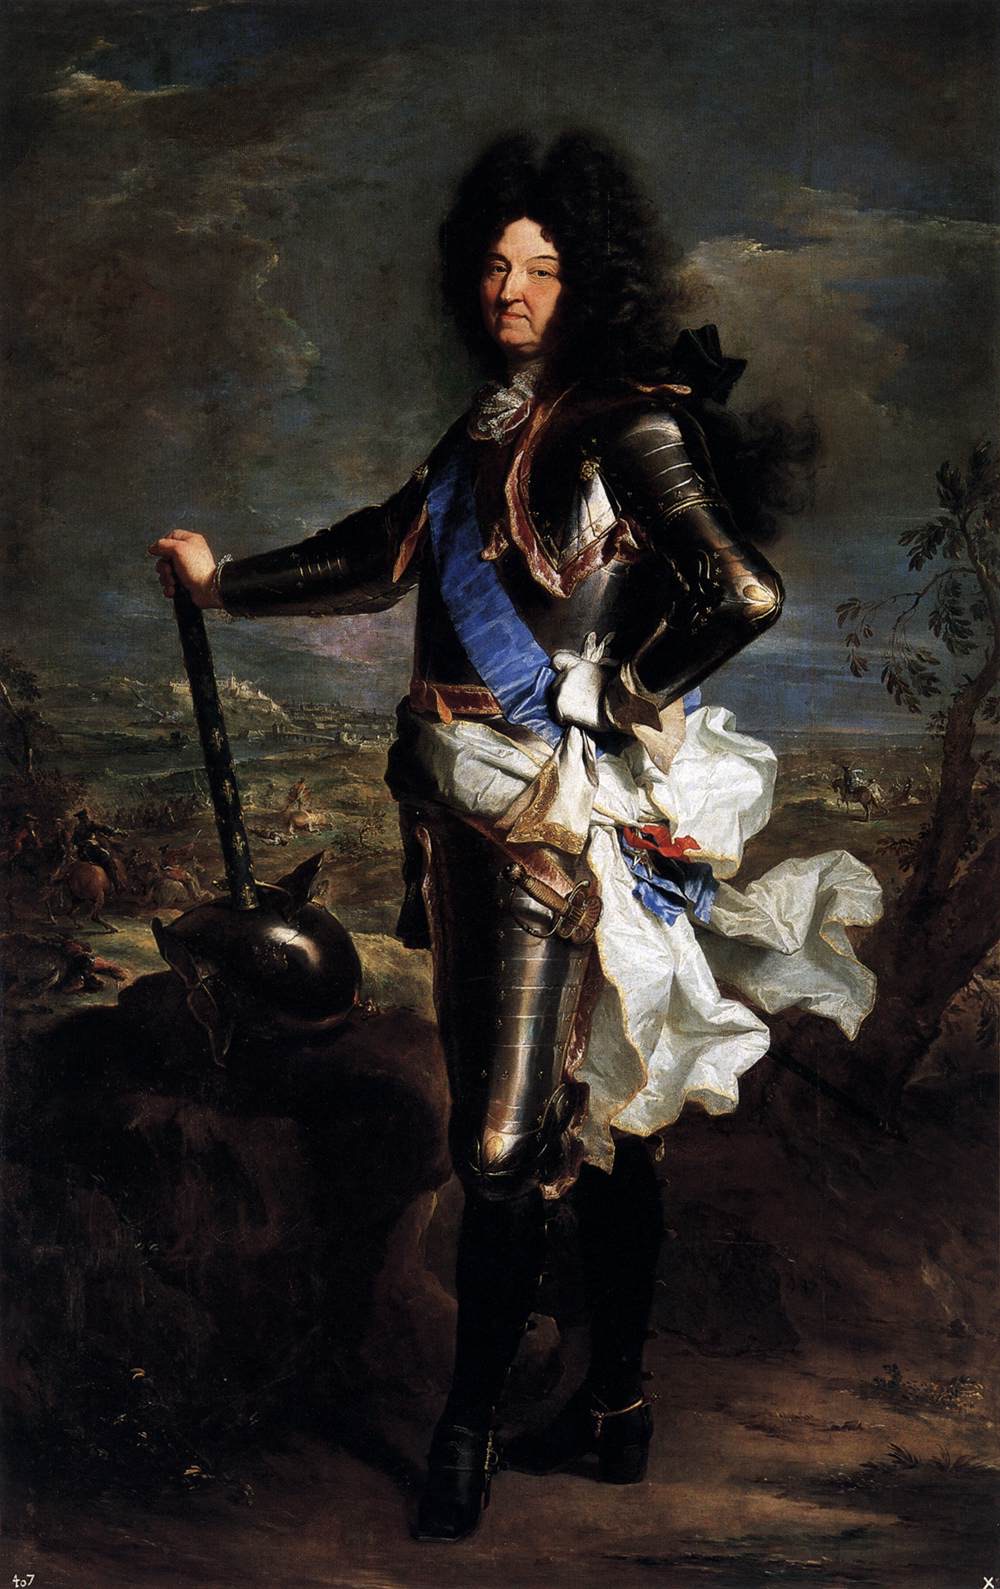 May 14, 1643: Death of Louis XIII, King of France and Navarre. Part I.